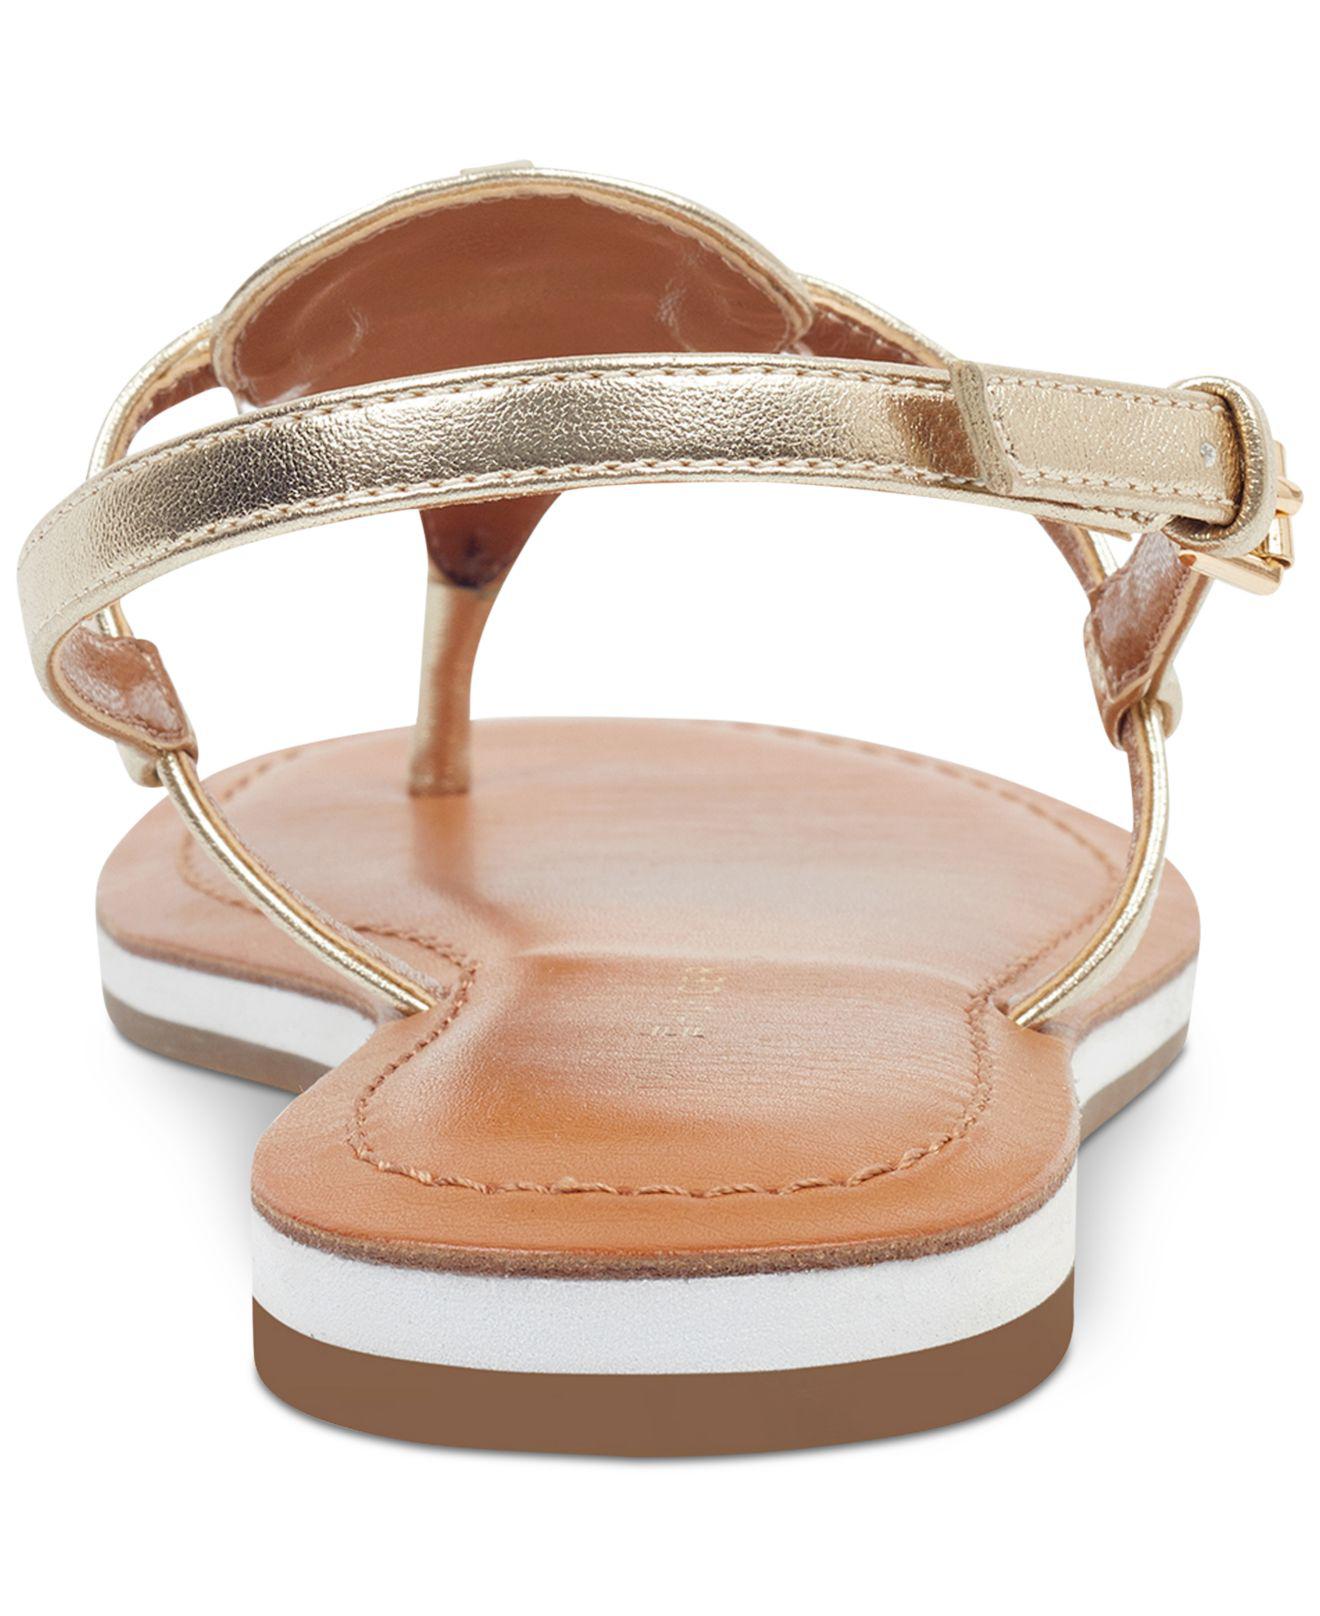 Tommy Hilfiger Genei Slingback Thong Sandals in Gold (Metallic) - Lyst